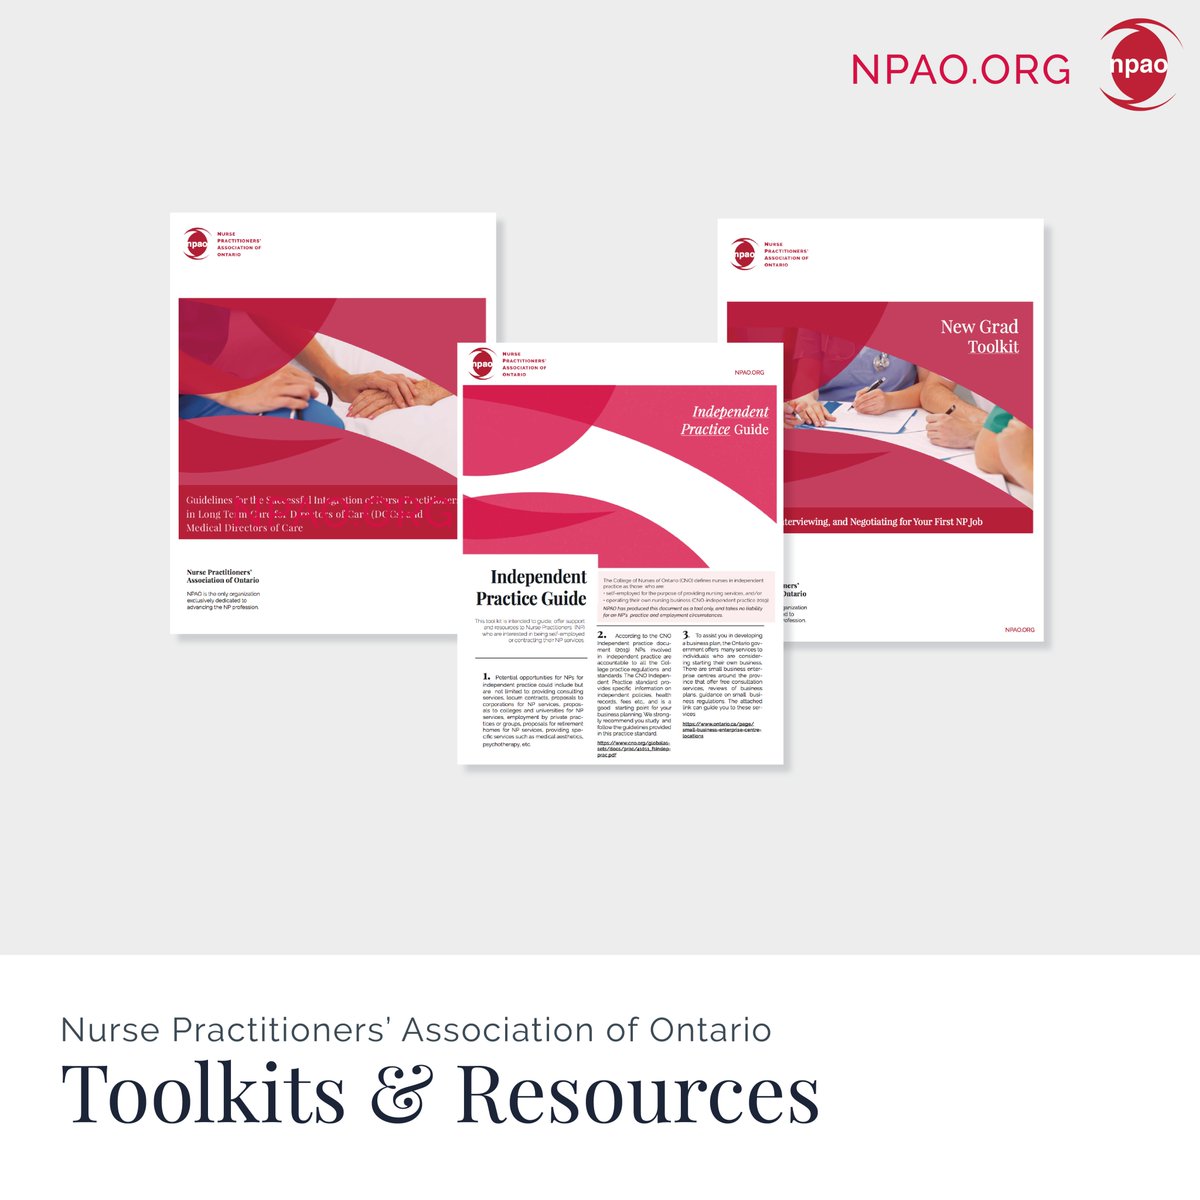 Unlock exclusive access! #NPAO members enjoy special privileges with resources, toolkits, and additional content to enhance your practice. Join this vibrant #NP community in #Ontario! Be part of NPAO, exclusively dedicated to Nurse Practitioners at npcentral.npao.org